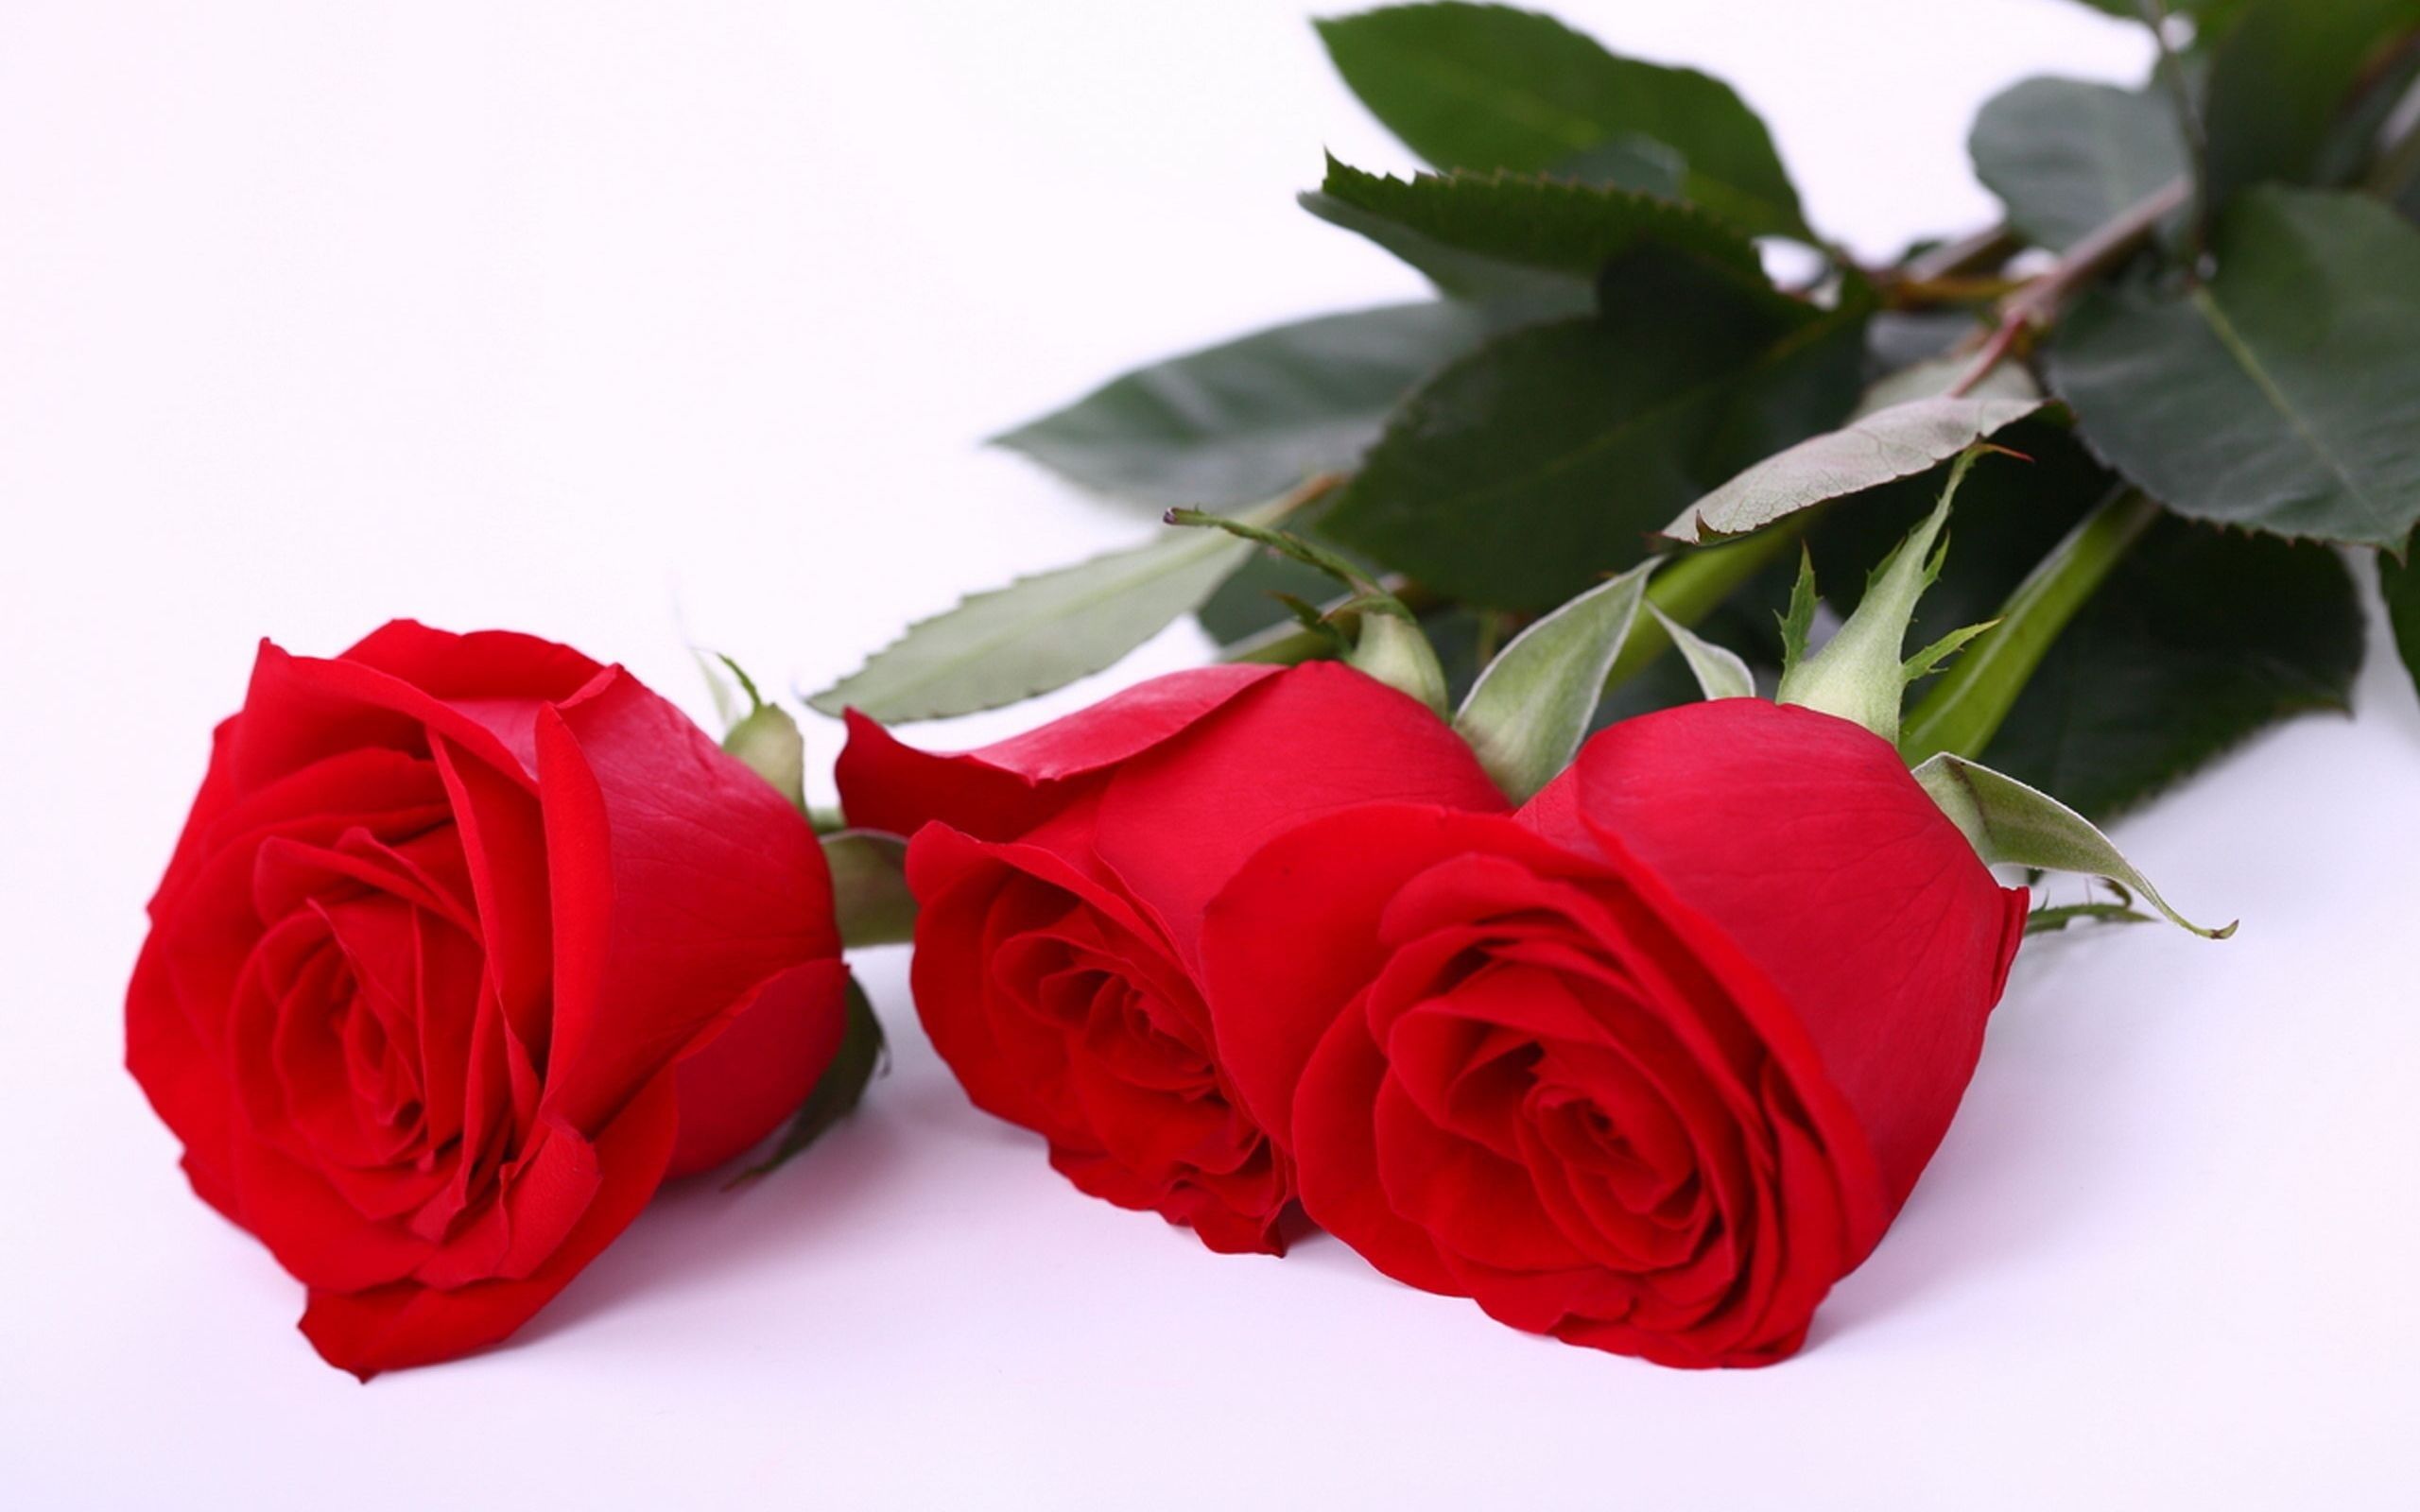 Red Rose HD Wallpaper, Red Rose Photos, New Backgrounds